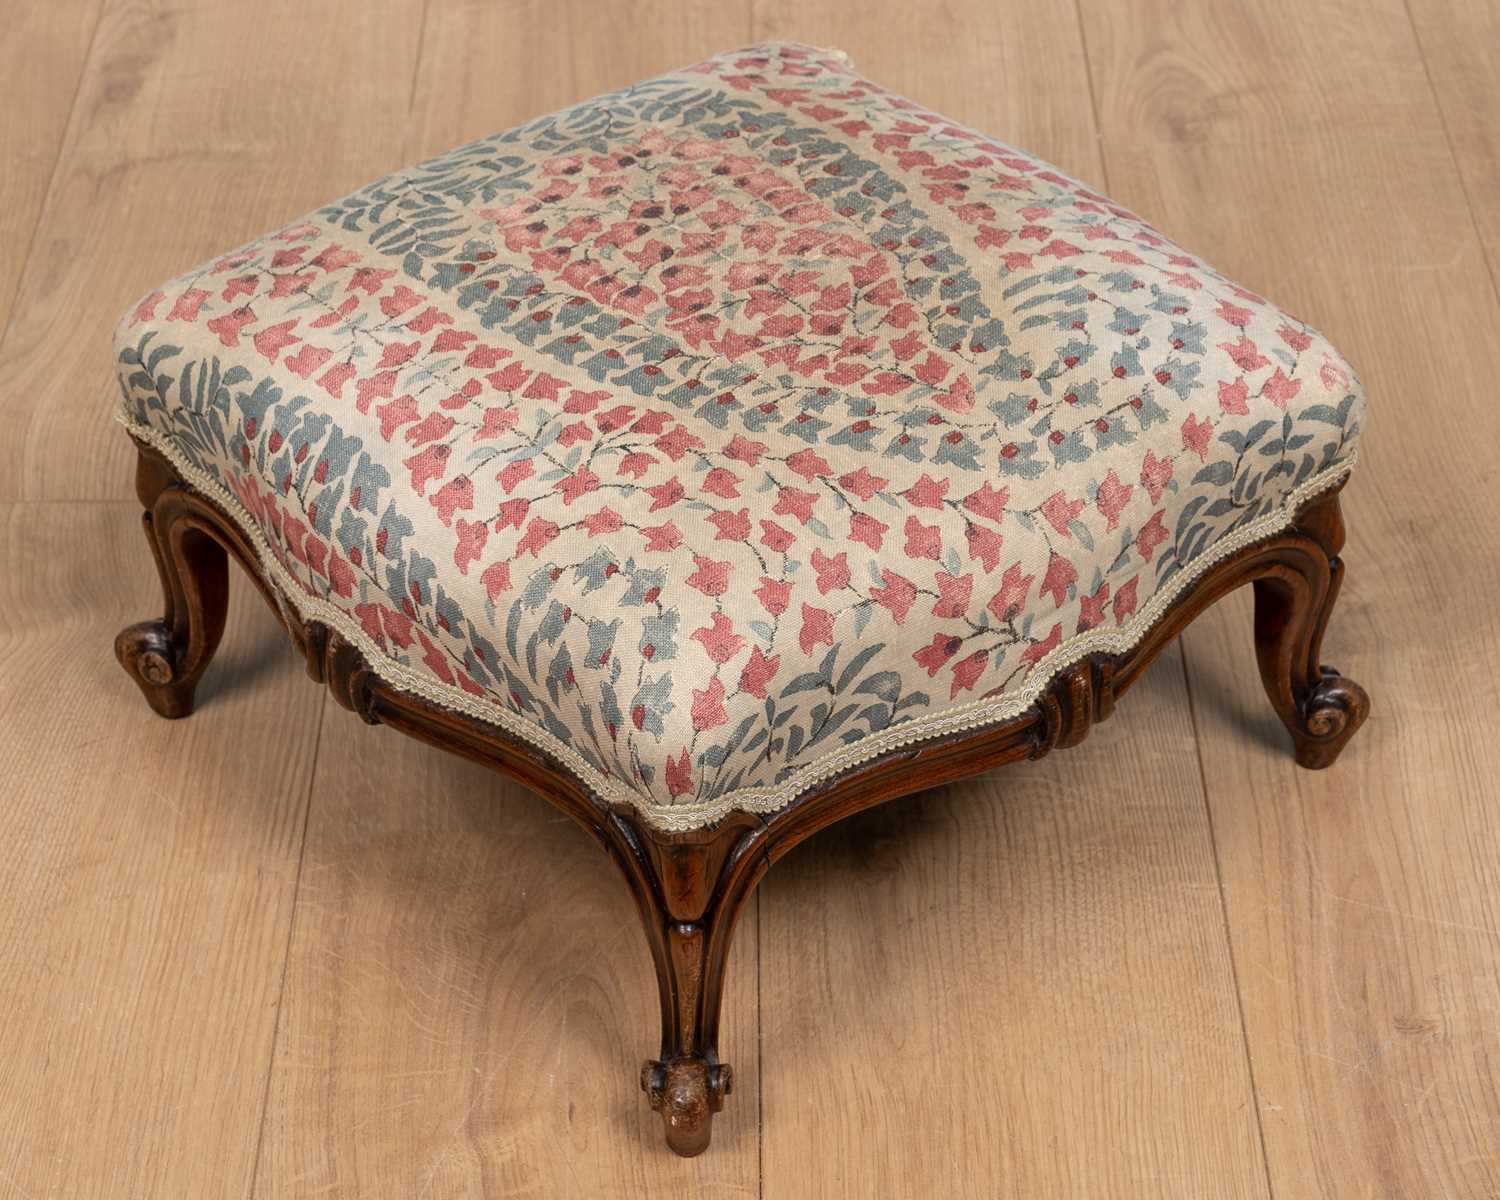 A small Victorian rosewood footstool